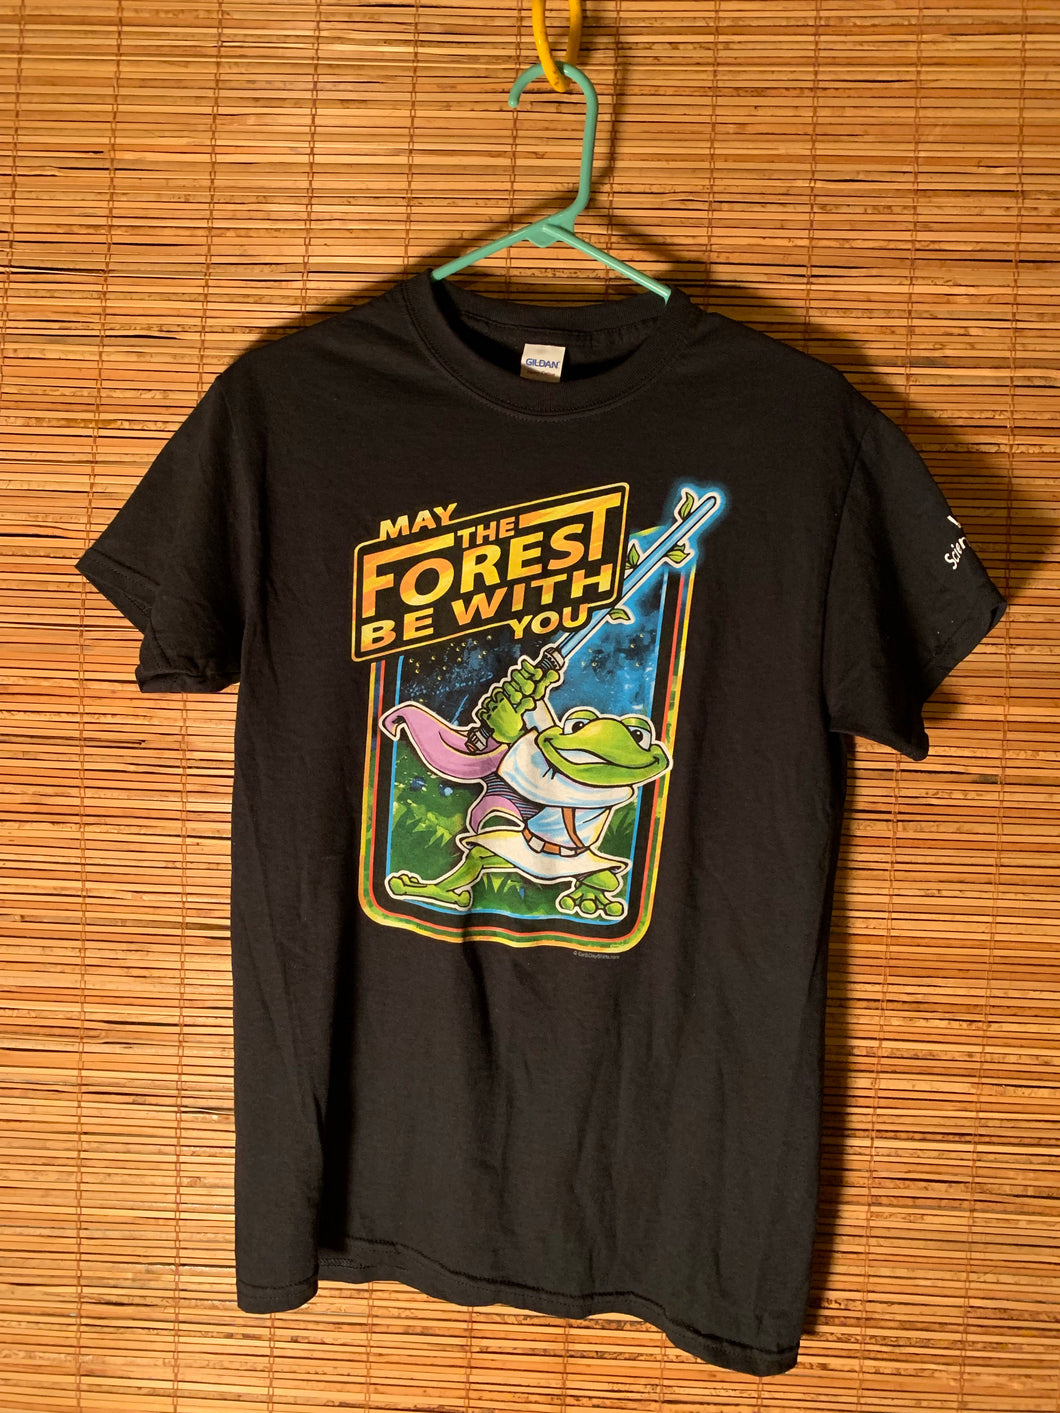 S - May The Forest Be With You Shirt